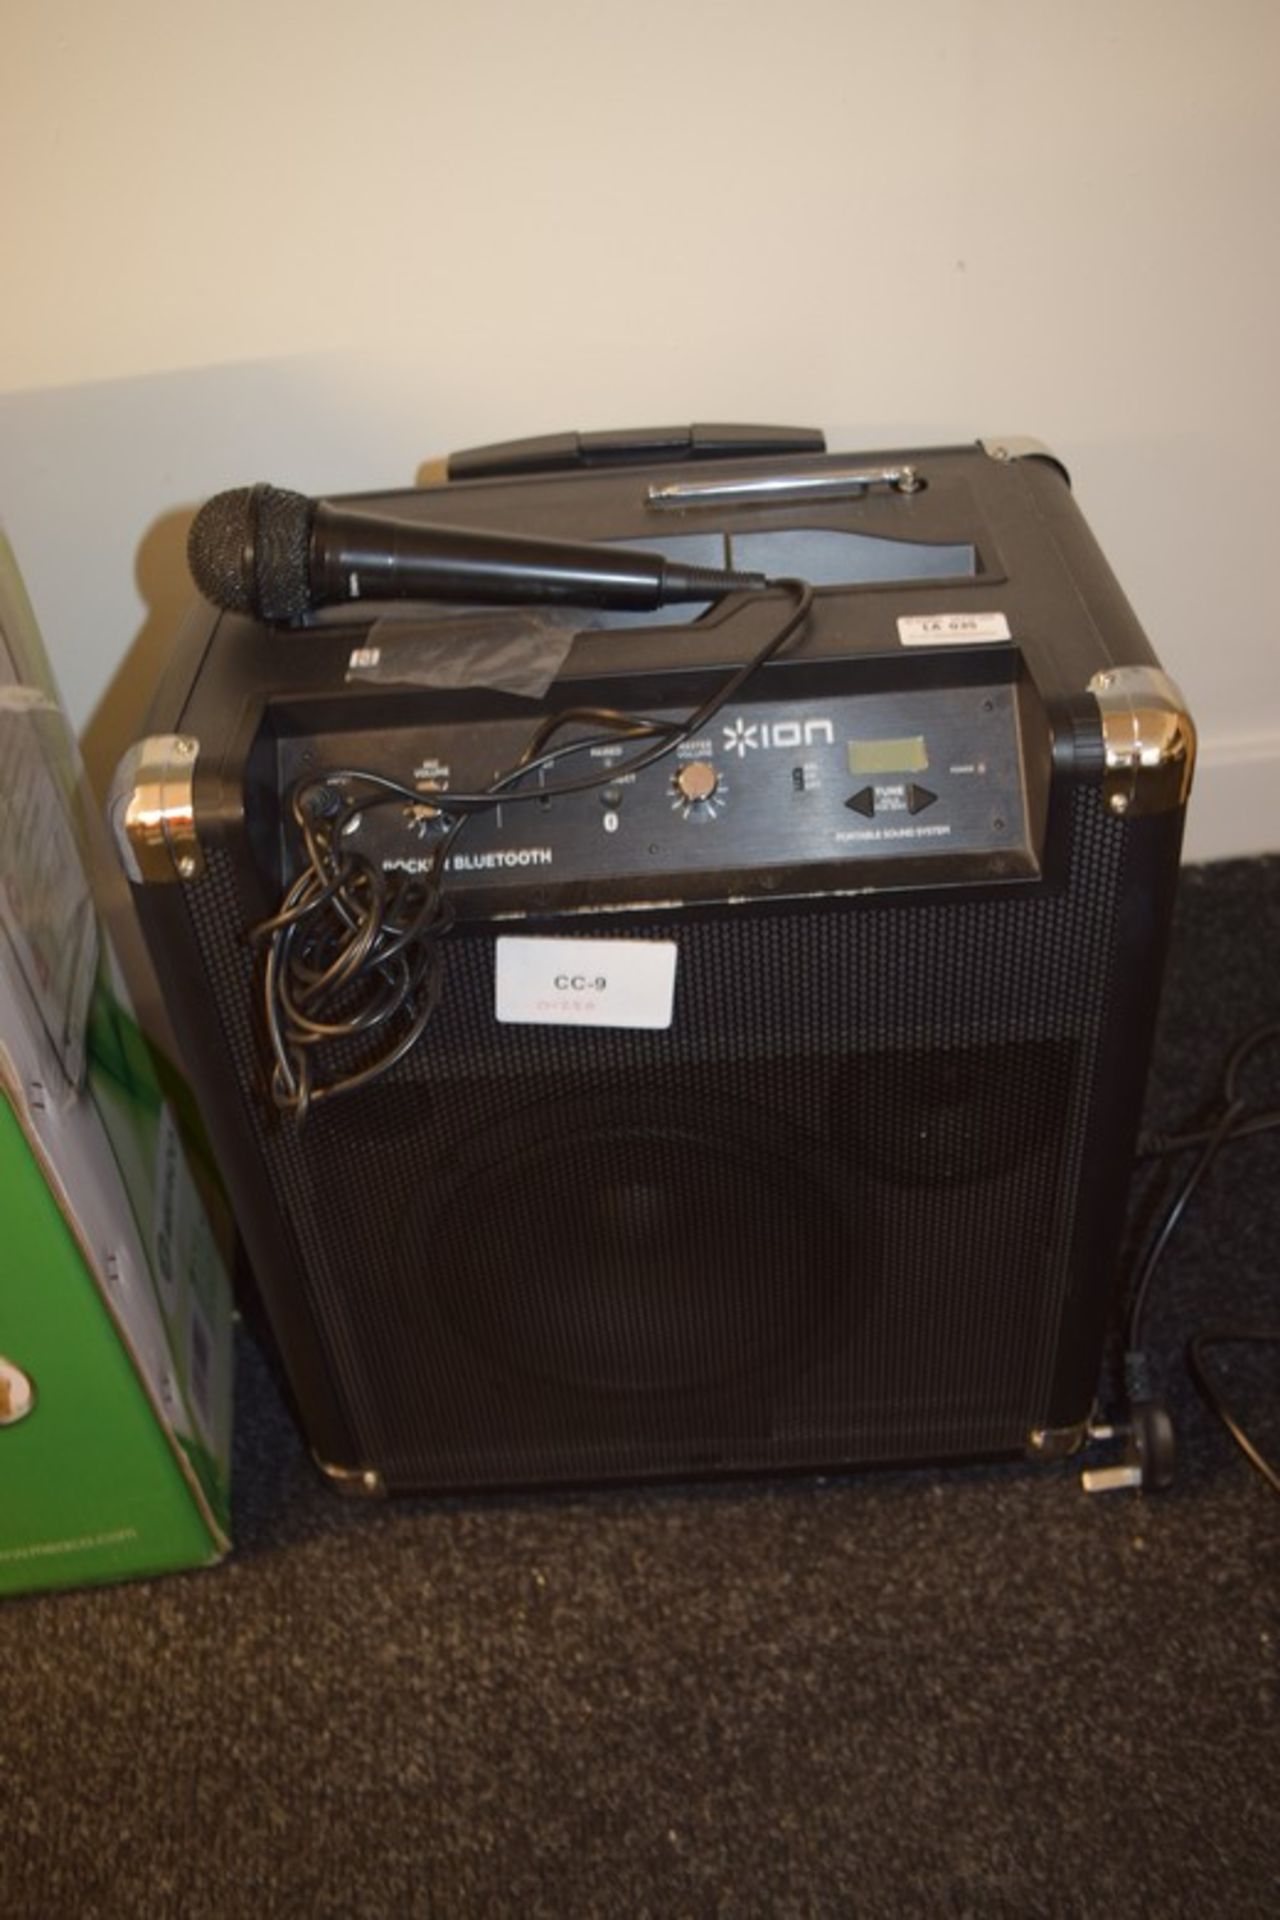 1 x ION PORTABLE SOUND SYSTEM RRP £150 *PLEASE NOTE THAT THE BID PRICE IS MULTIPLIED BY THE NUMBER